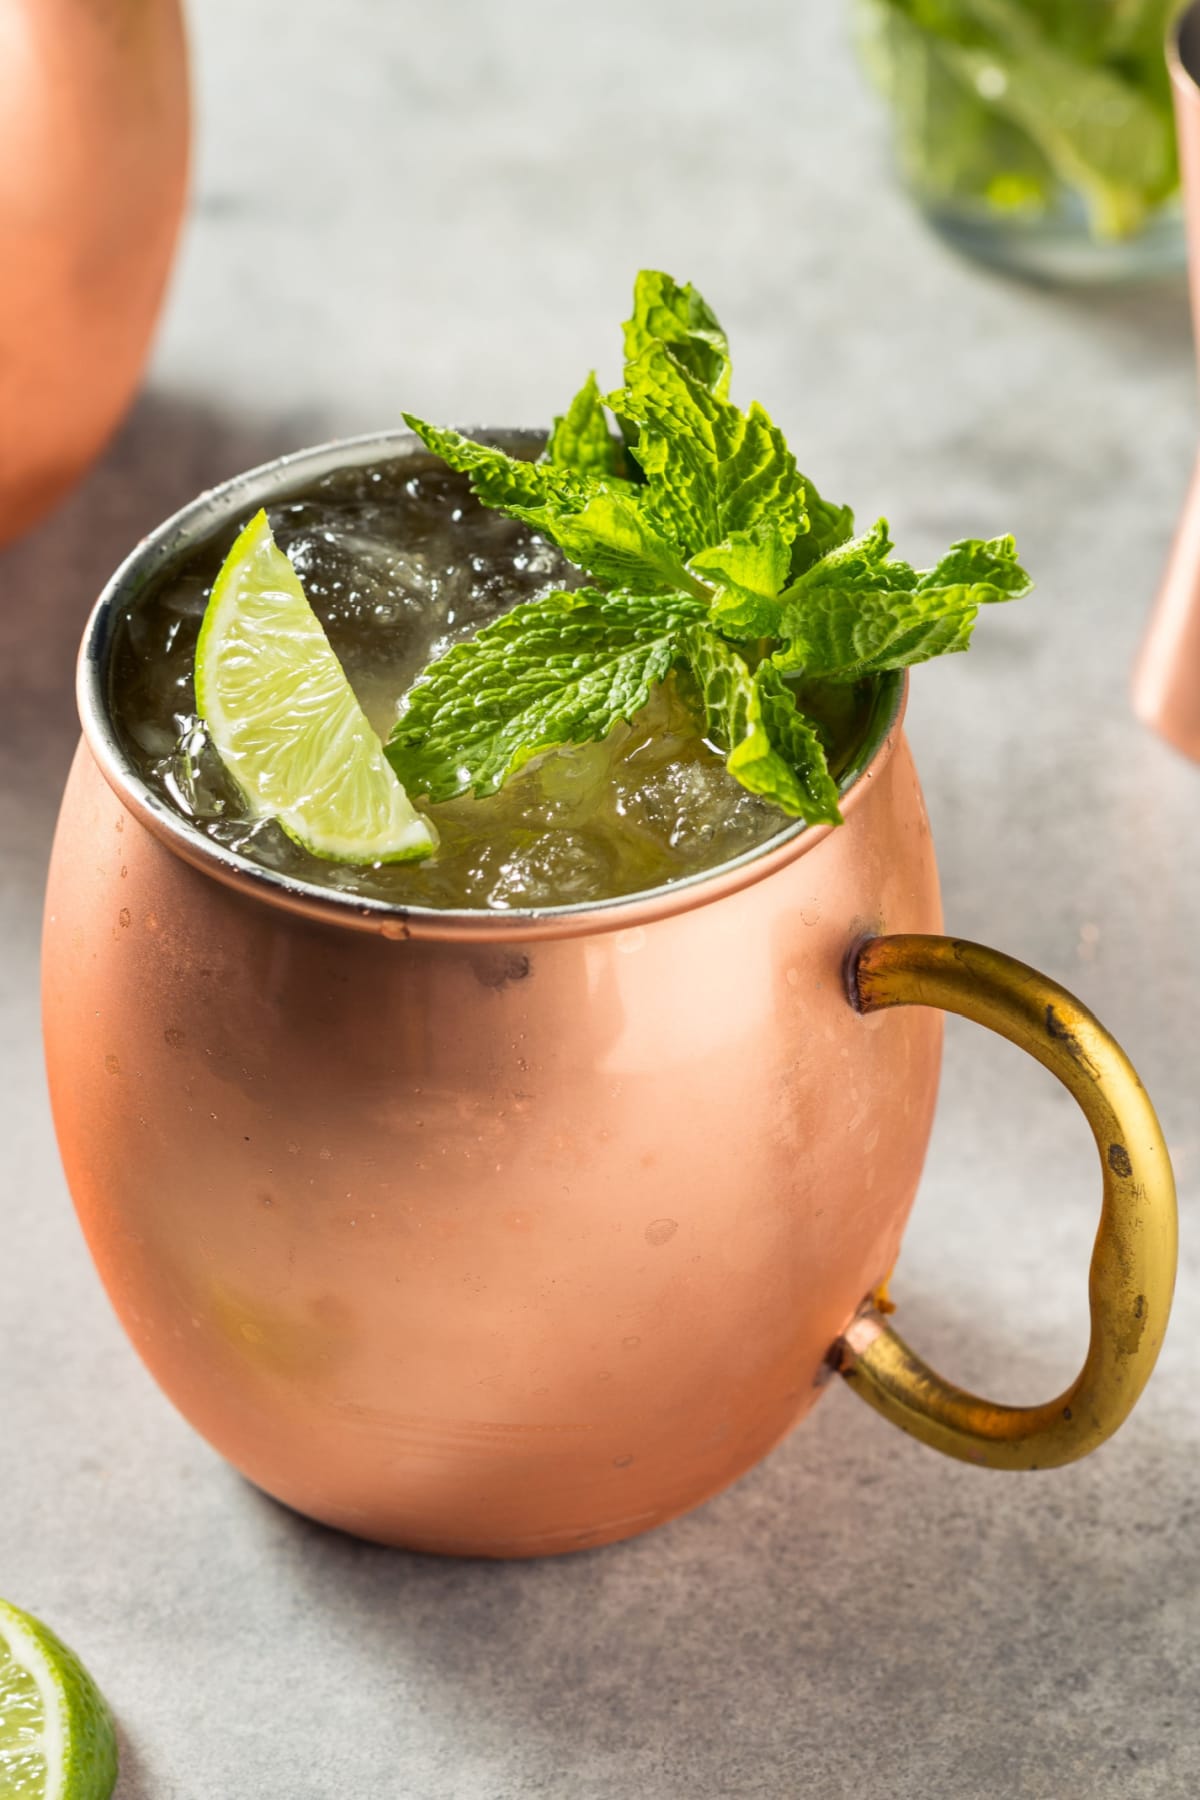 Kentucky mule served in a mule mug filled with ice garnished with lime slice and fresh mint sprig.